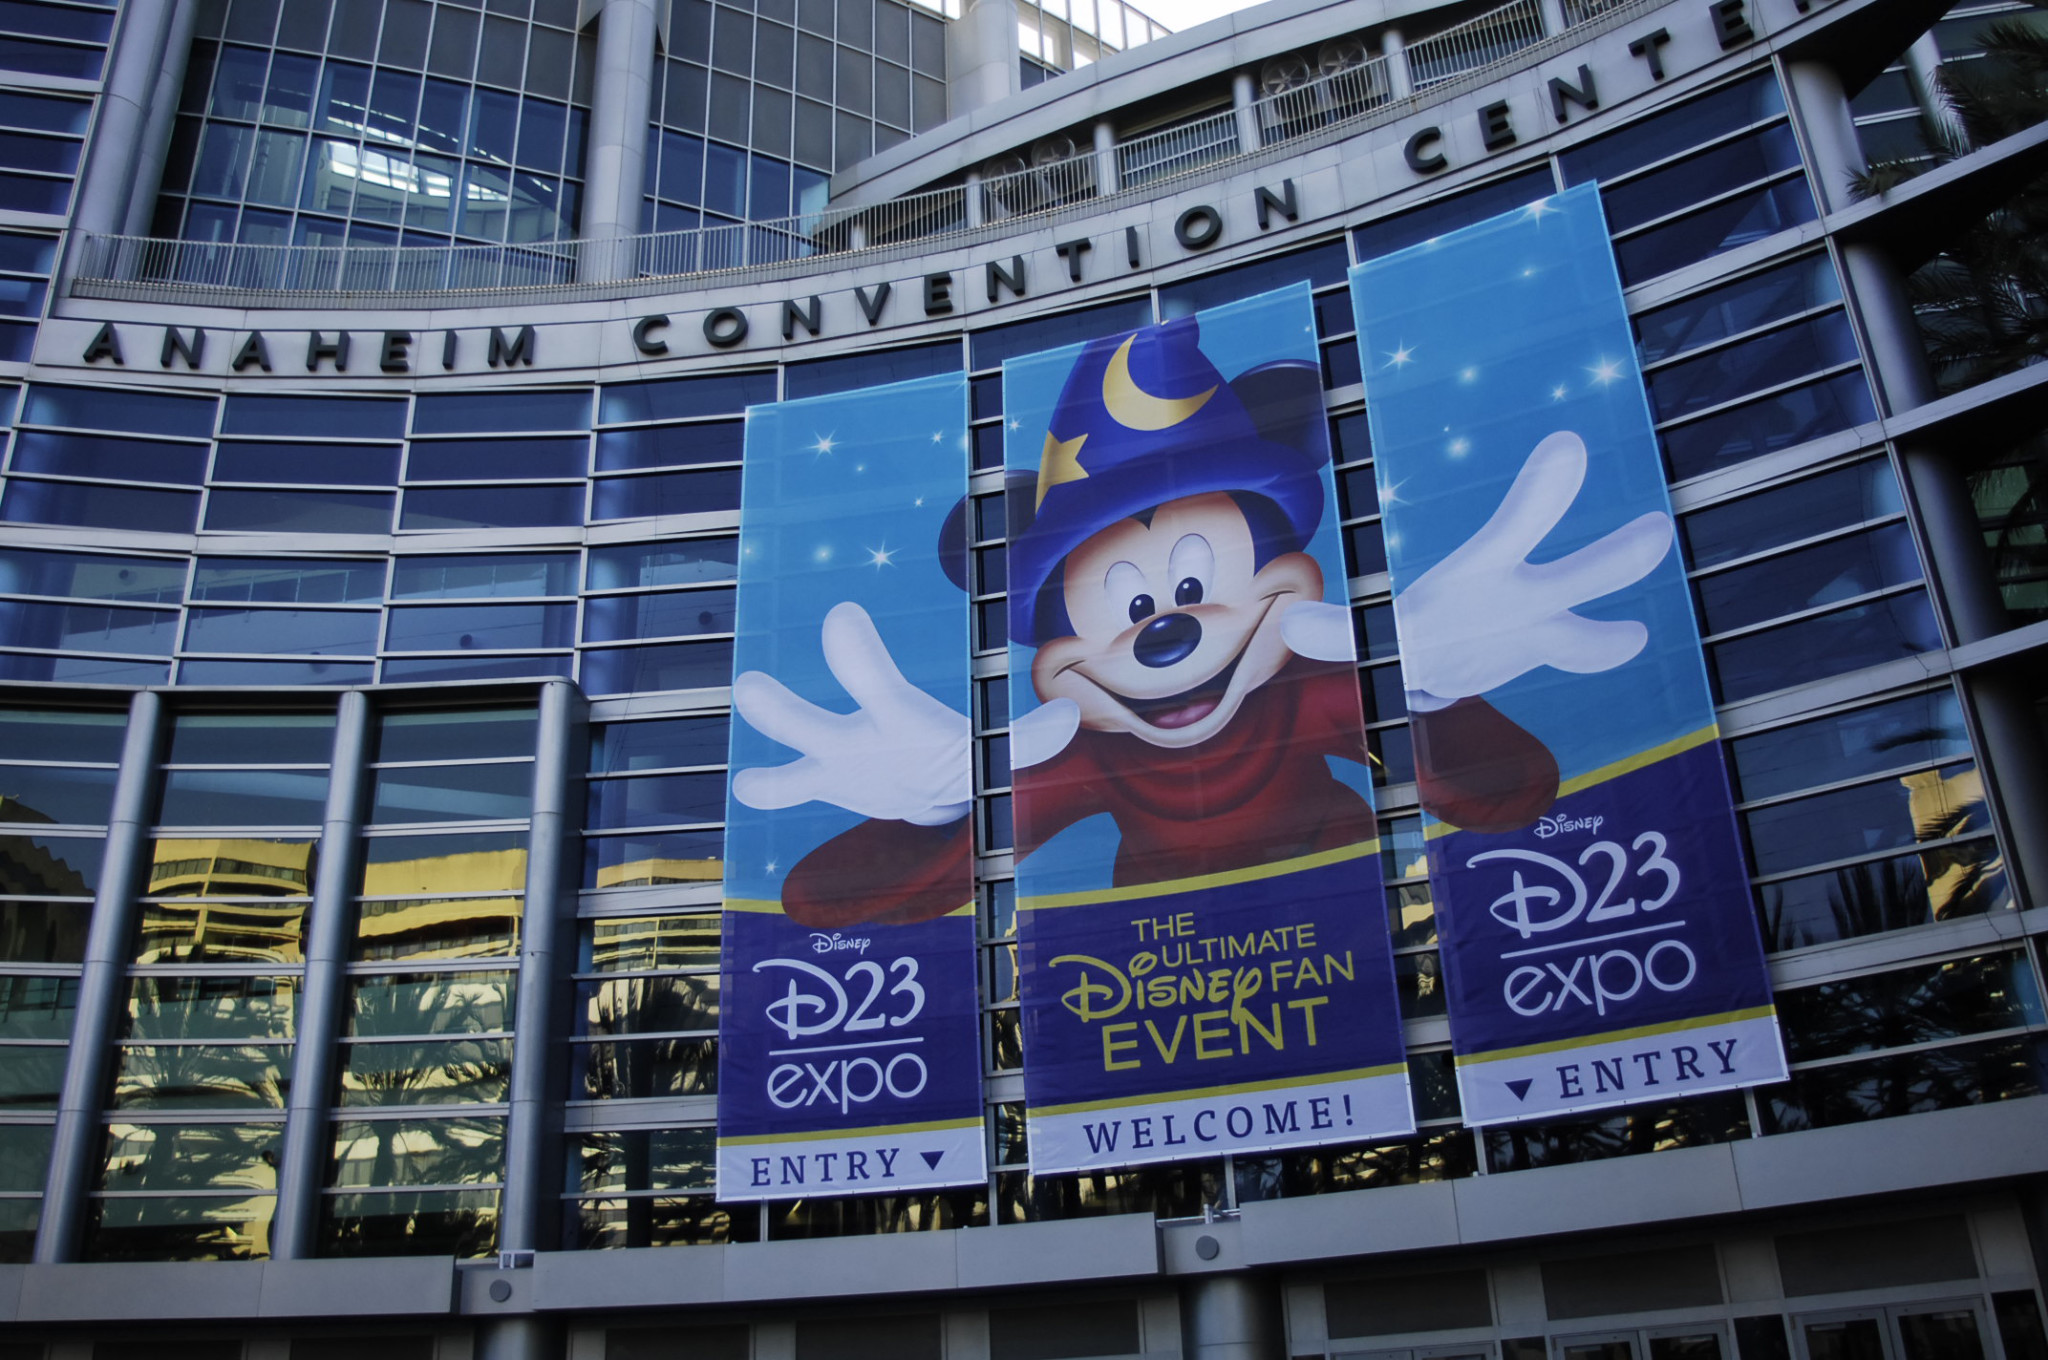 2013 Disney Legends Award Honorees To Be Celebrated During D23 Expo